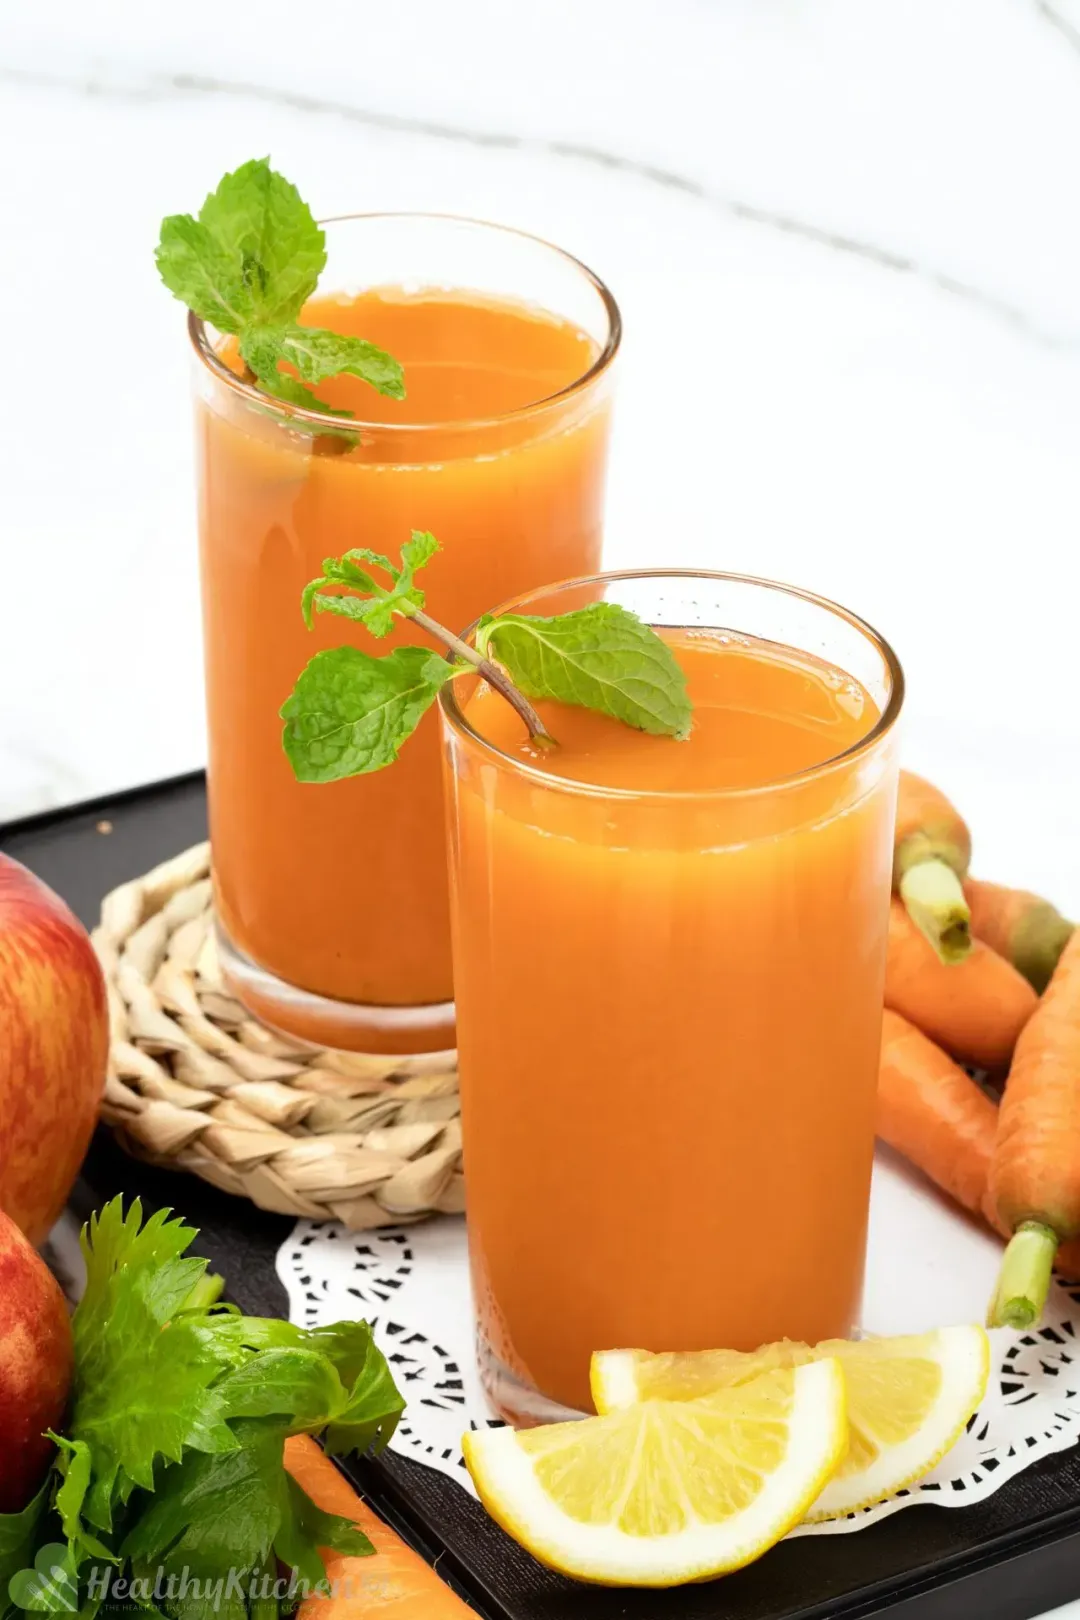 Two glasses of carrots and celery juice garnished with lemon wedges and sprigs of mint